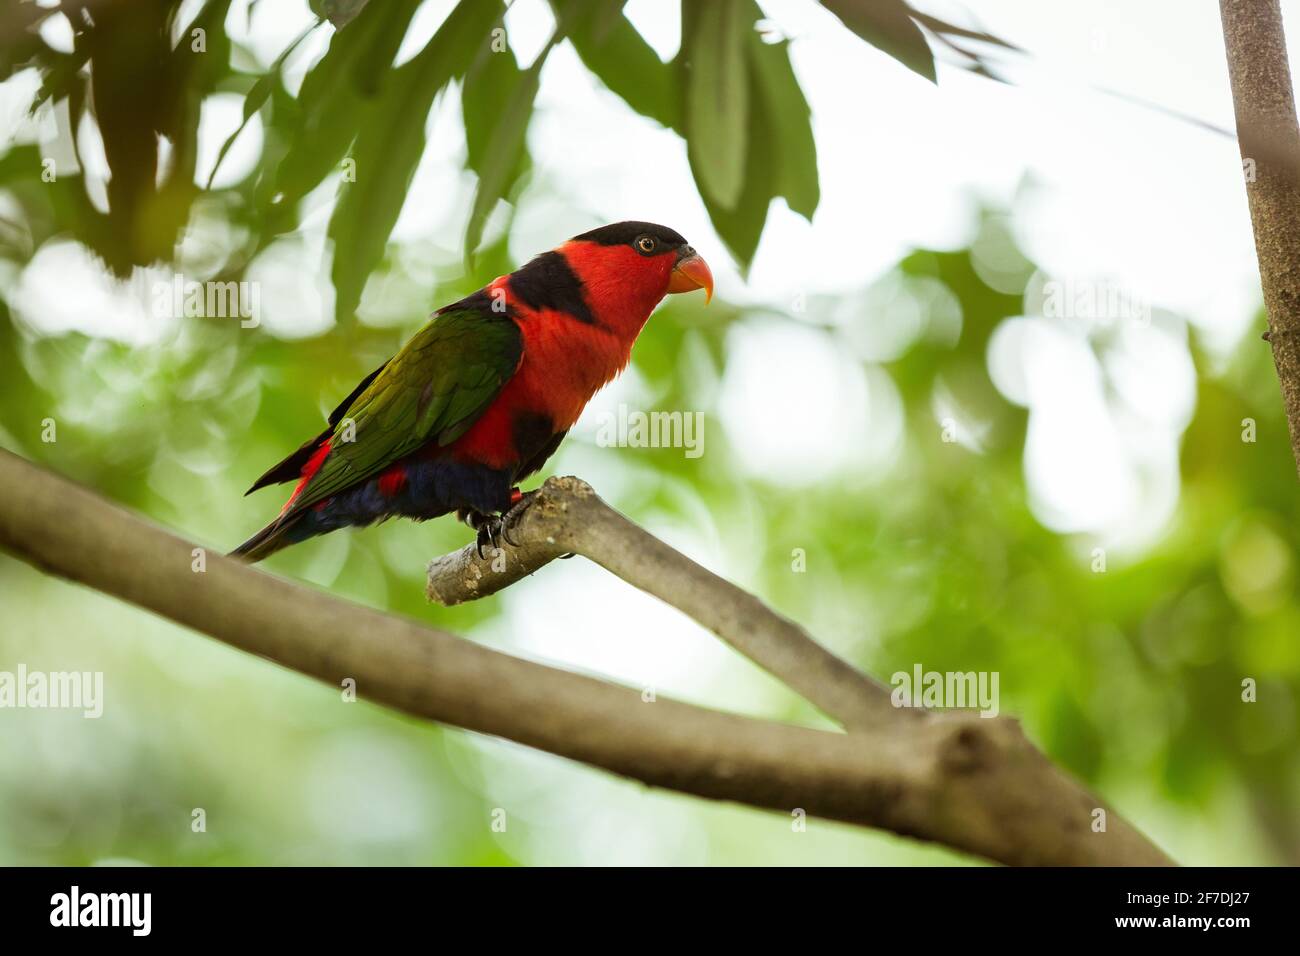 Lorius on a tree branch. Lorius is a genus of lorikeet in the parrot family Psittaculidae. Stock Photo